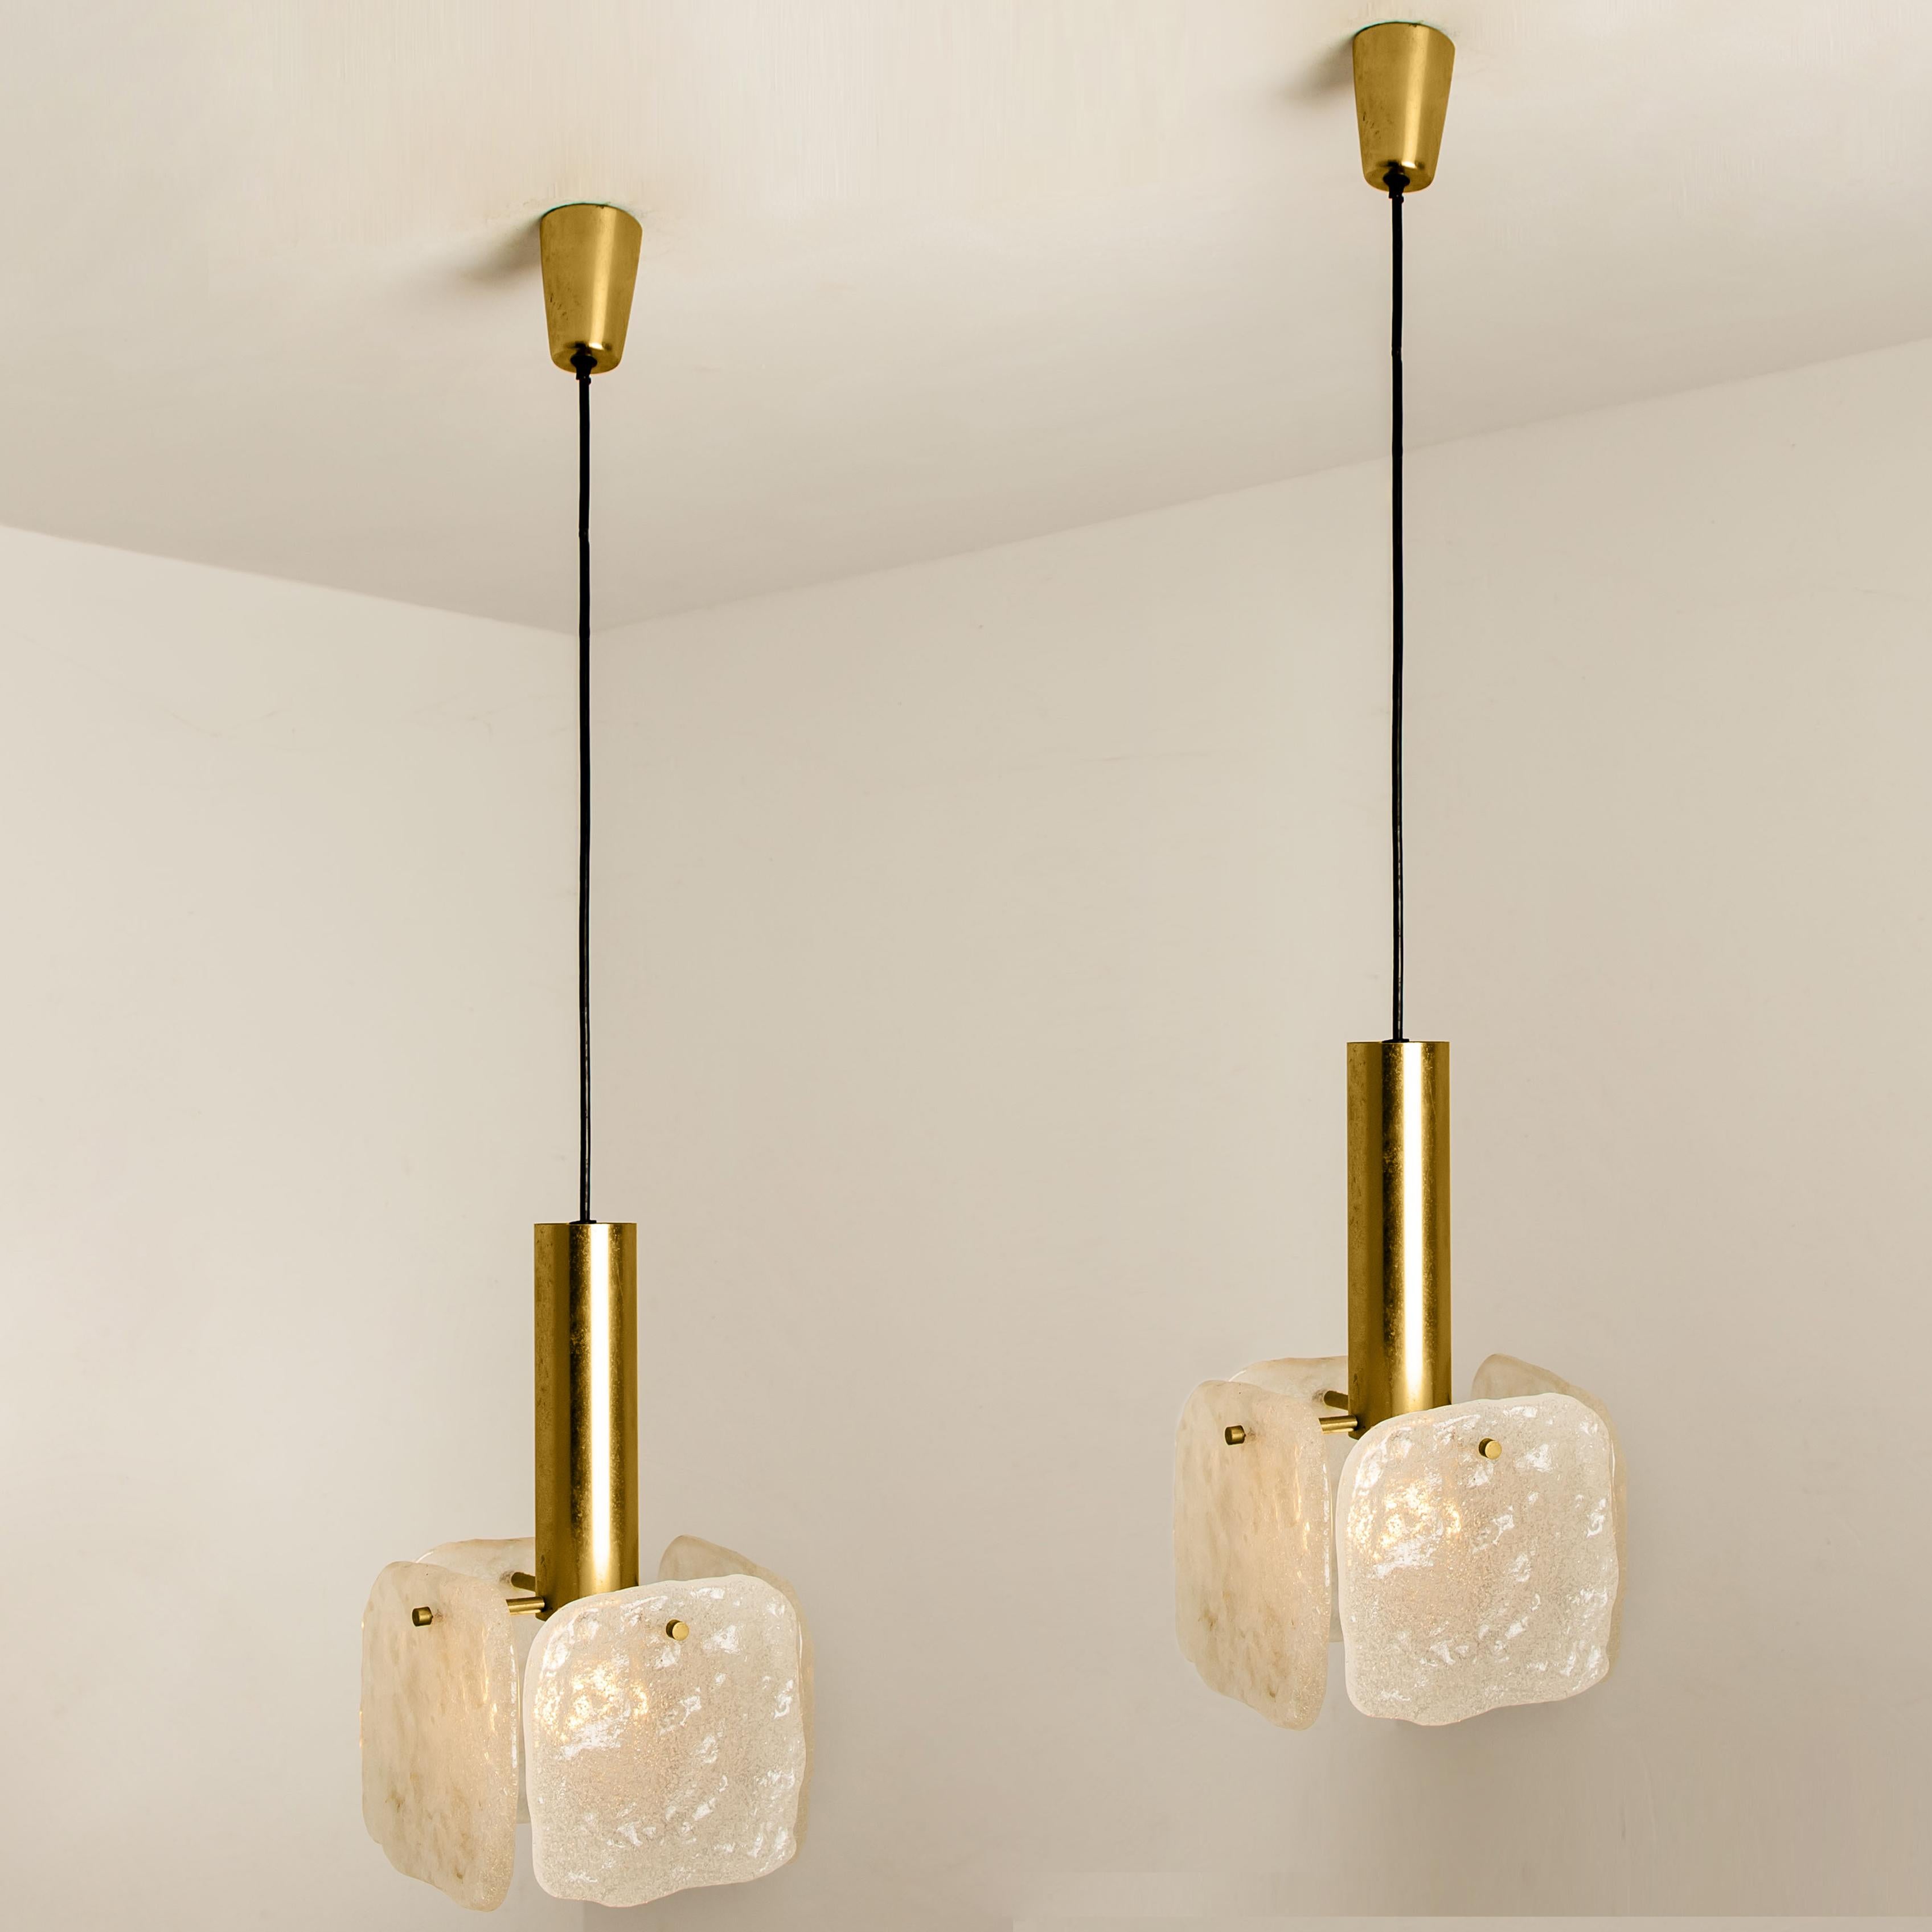 Plated One of Three Ice Glass Pendant Lights from J.T. Kalmar, 1960s For Sale